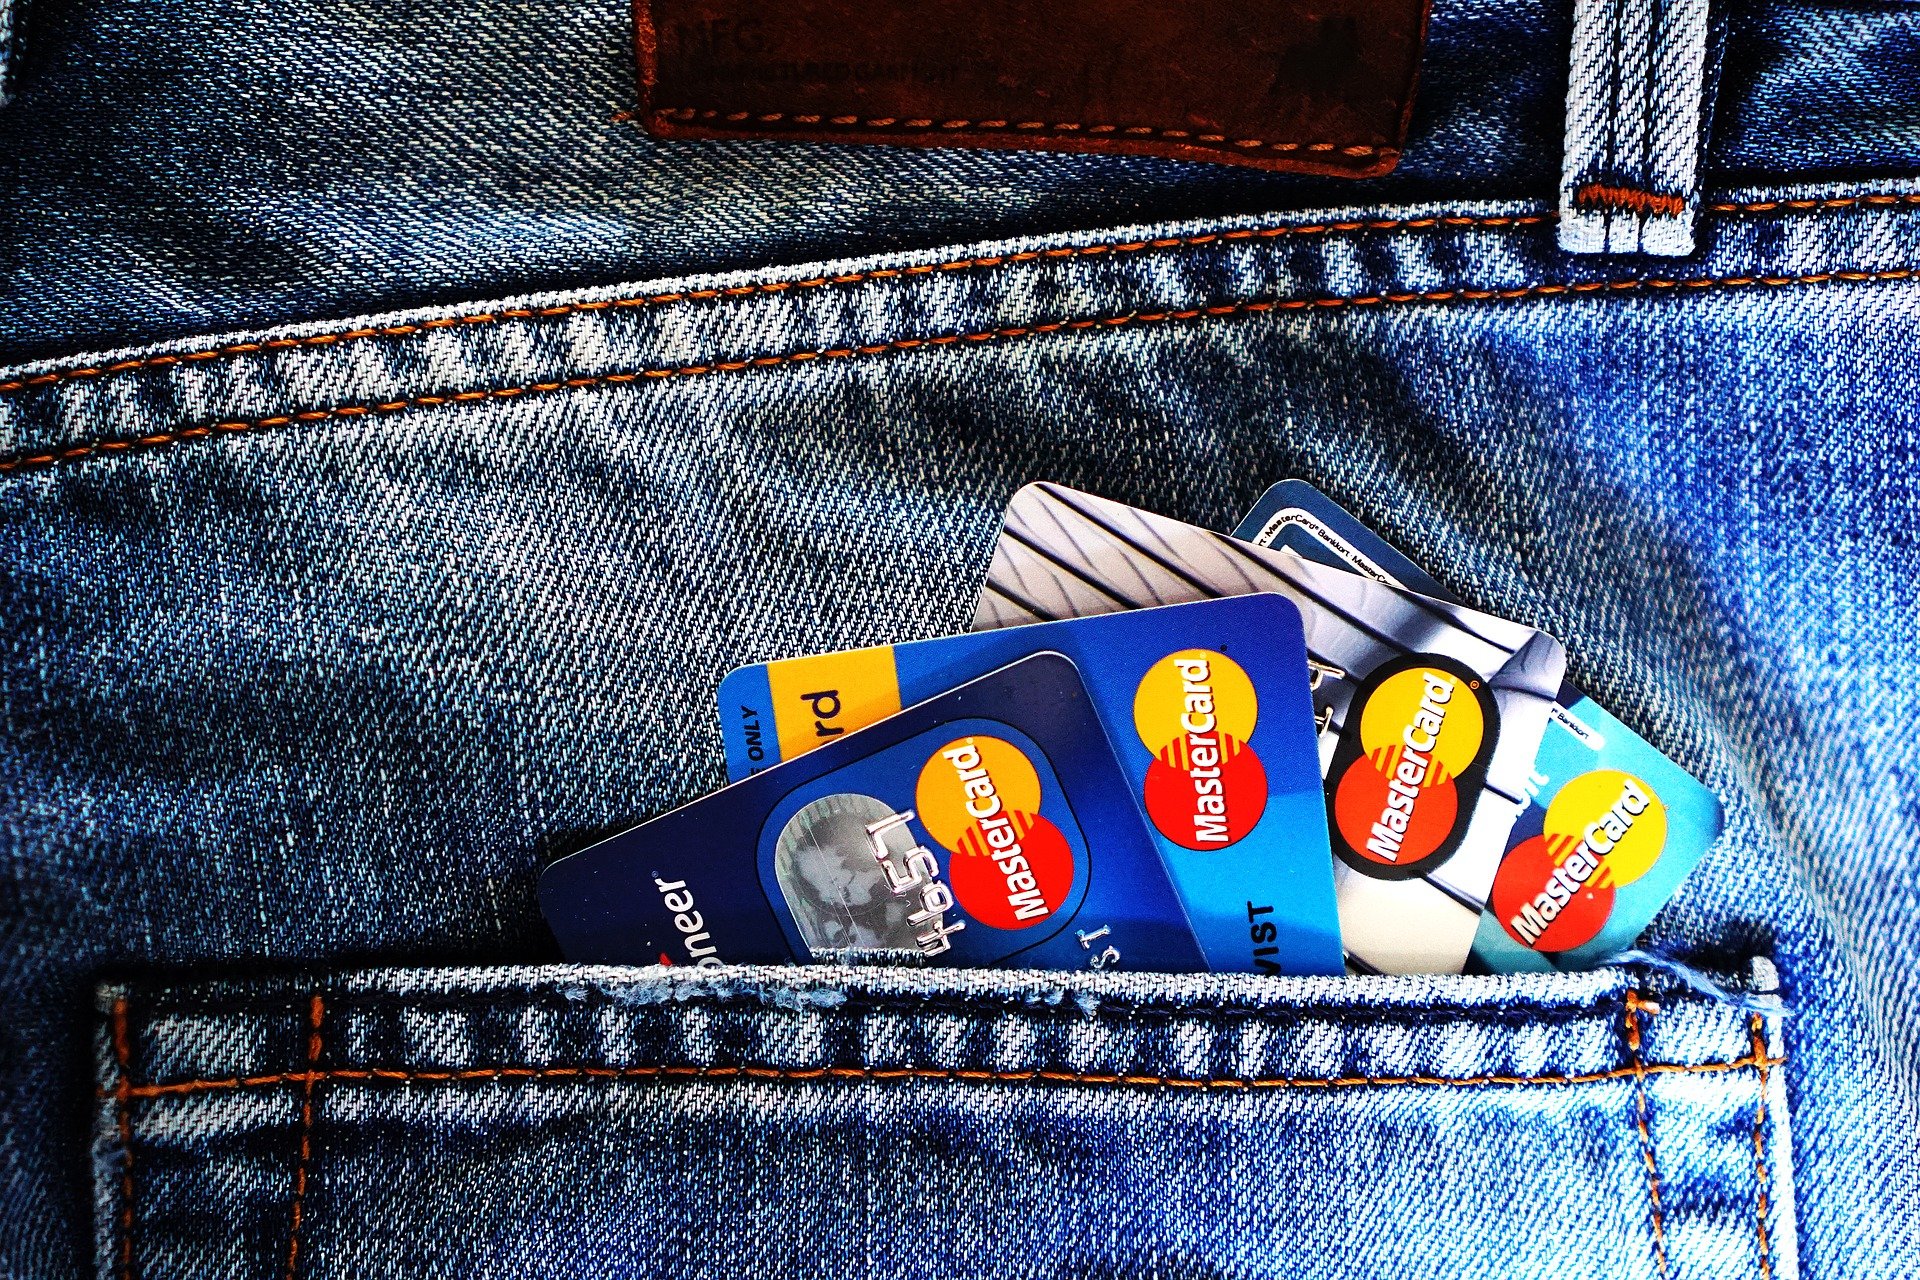 Pocket filled with credit cards. | Photo: Pixabay/TheDigitalWay 